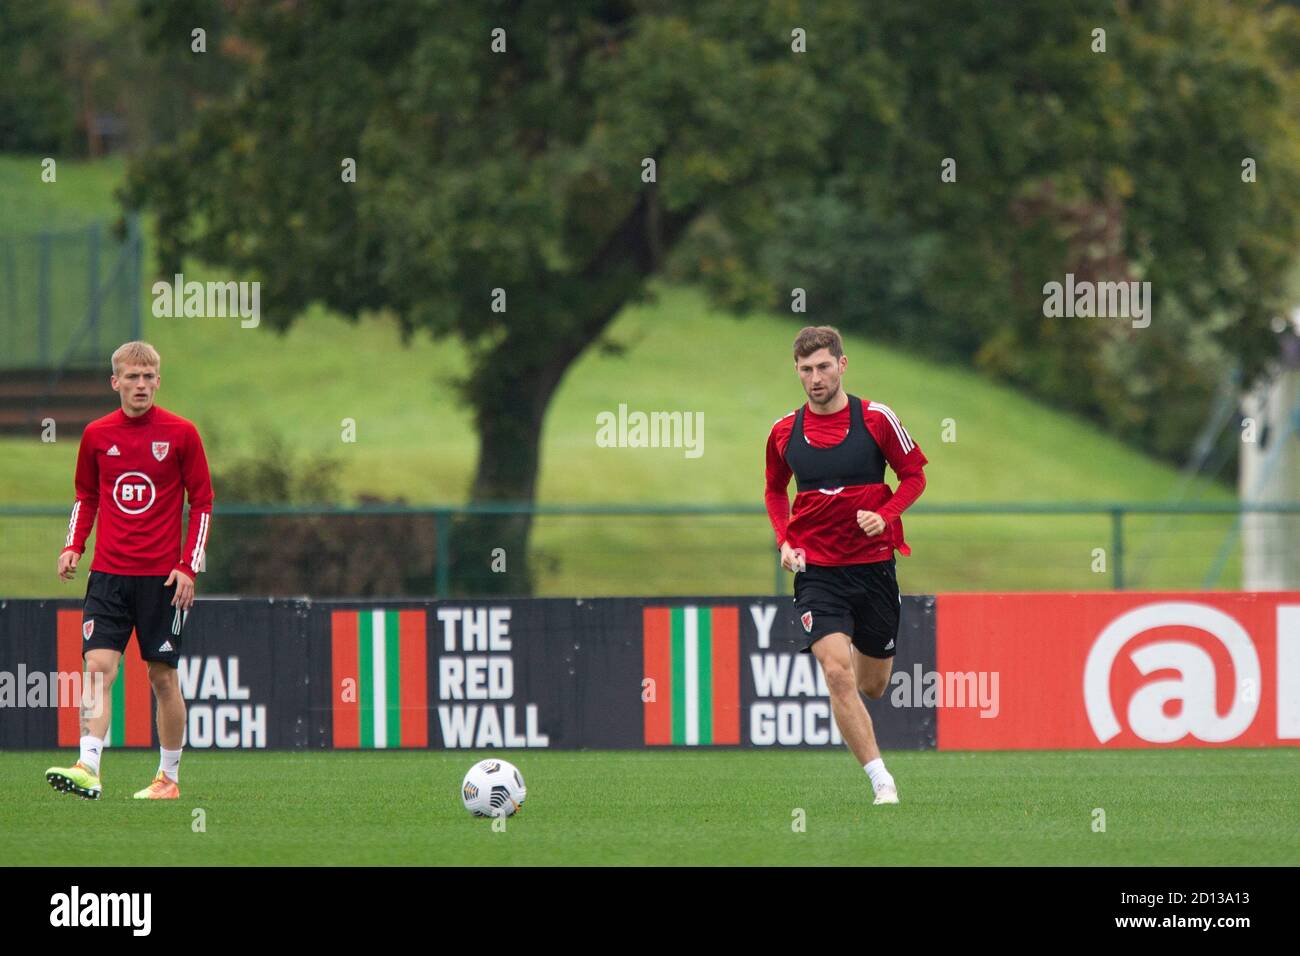 Hensol, Wales, UK. 5th Oct, 2020. Ben Davies during Wales national football team training ahead of matches against England, Republic of Ireland and Bulgaria. Credit: Mark Hawkins/Alamy Live News Stock Photo